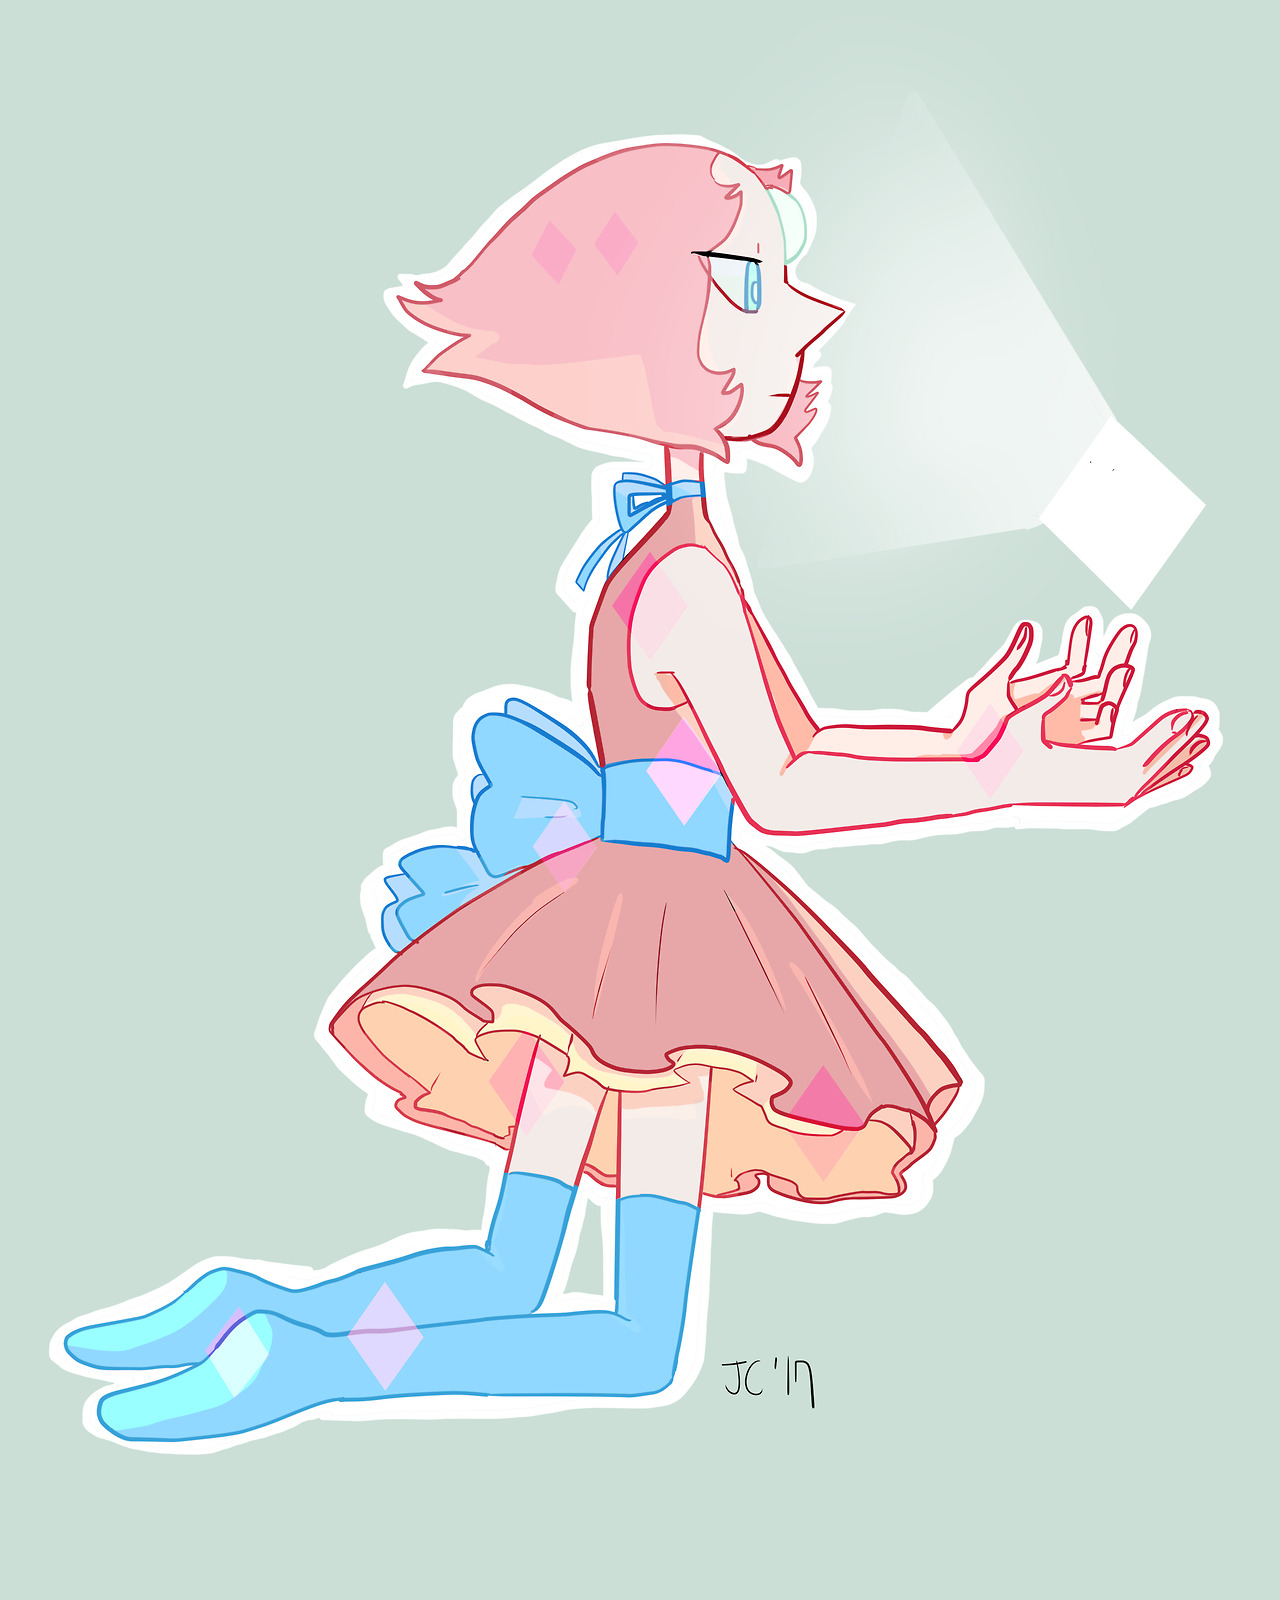 Experimenting with effects, here’s a Pearl